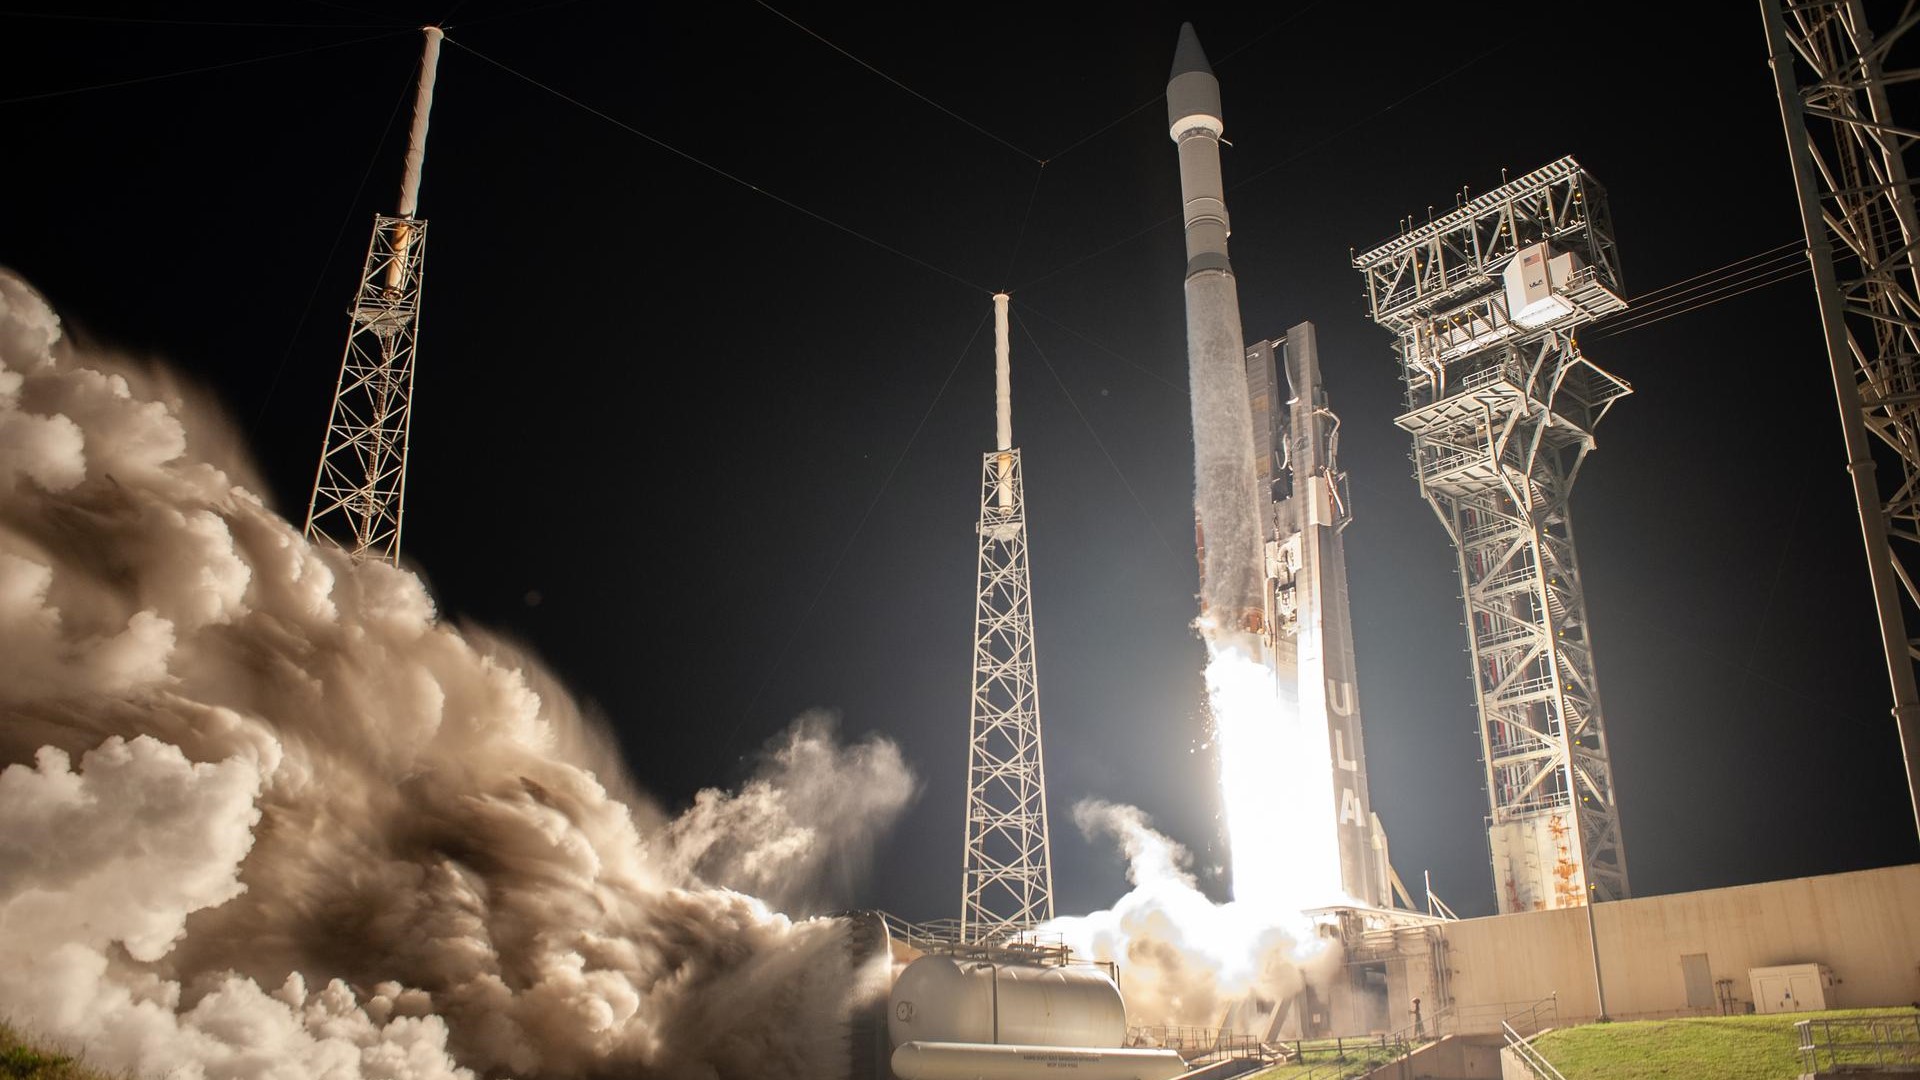 NASA’s Lucy mission launched at 5:34 a.m. EDT (09:34 GMT) on Oct. 16, 2021 from the Kennedy Space Center atop a United Launch Alliance (ULA) Atlas V rocket.